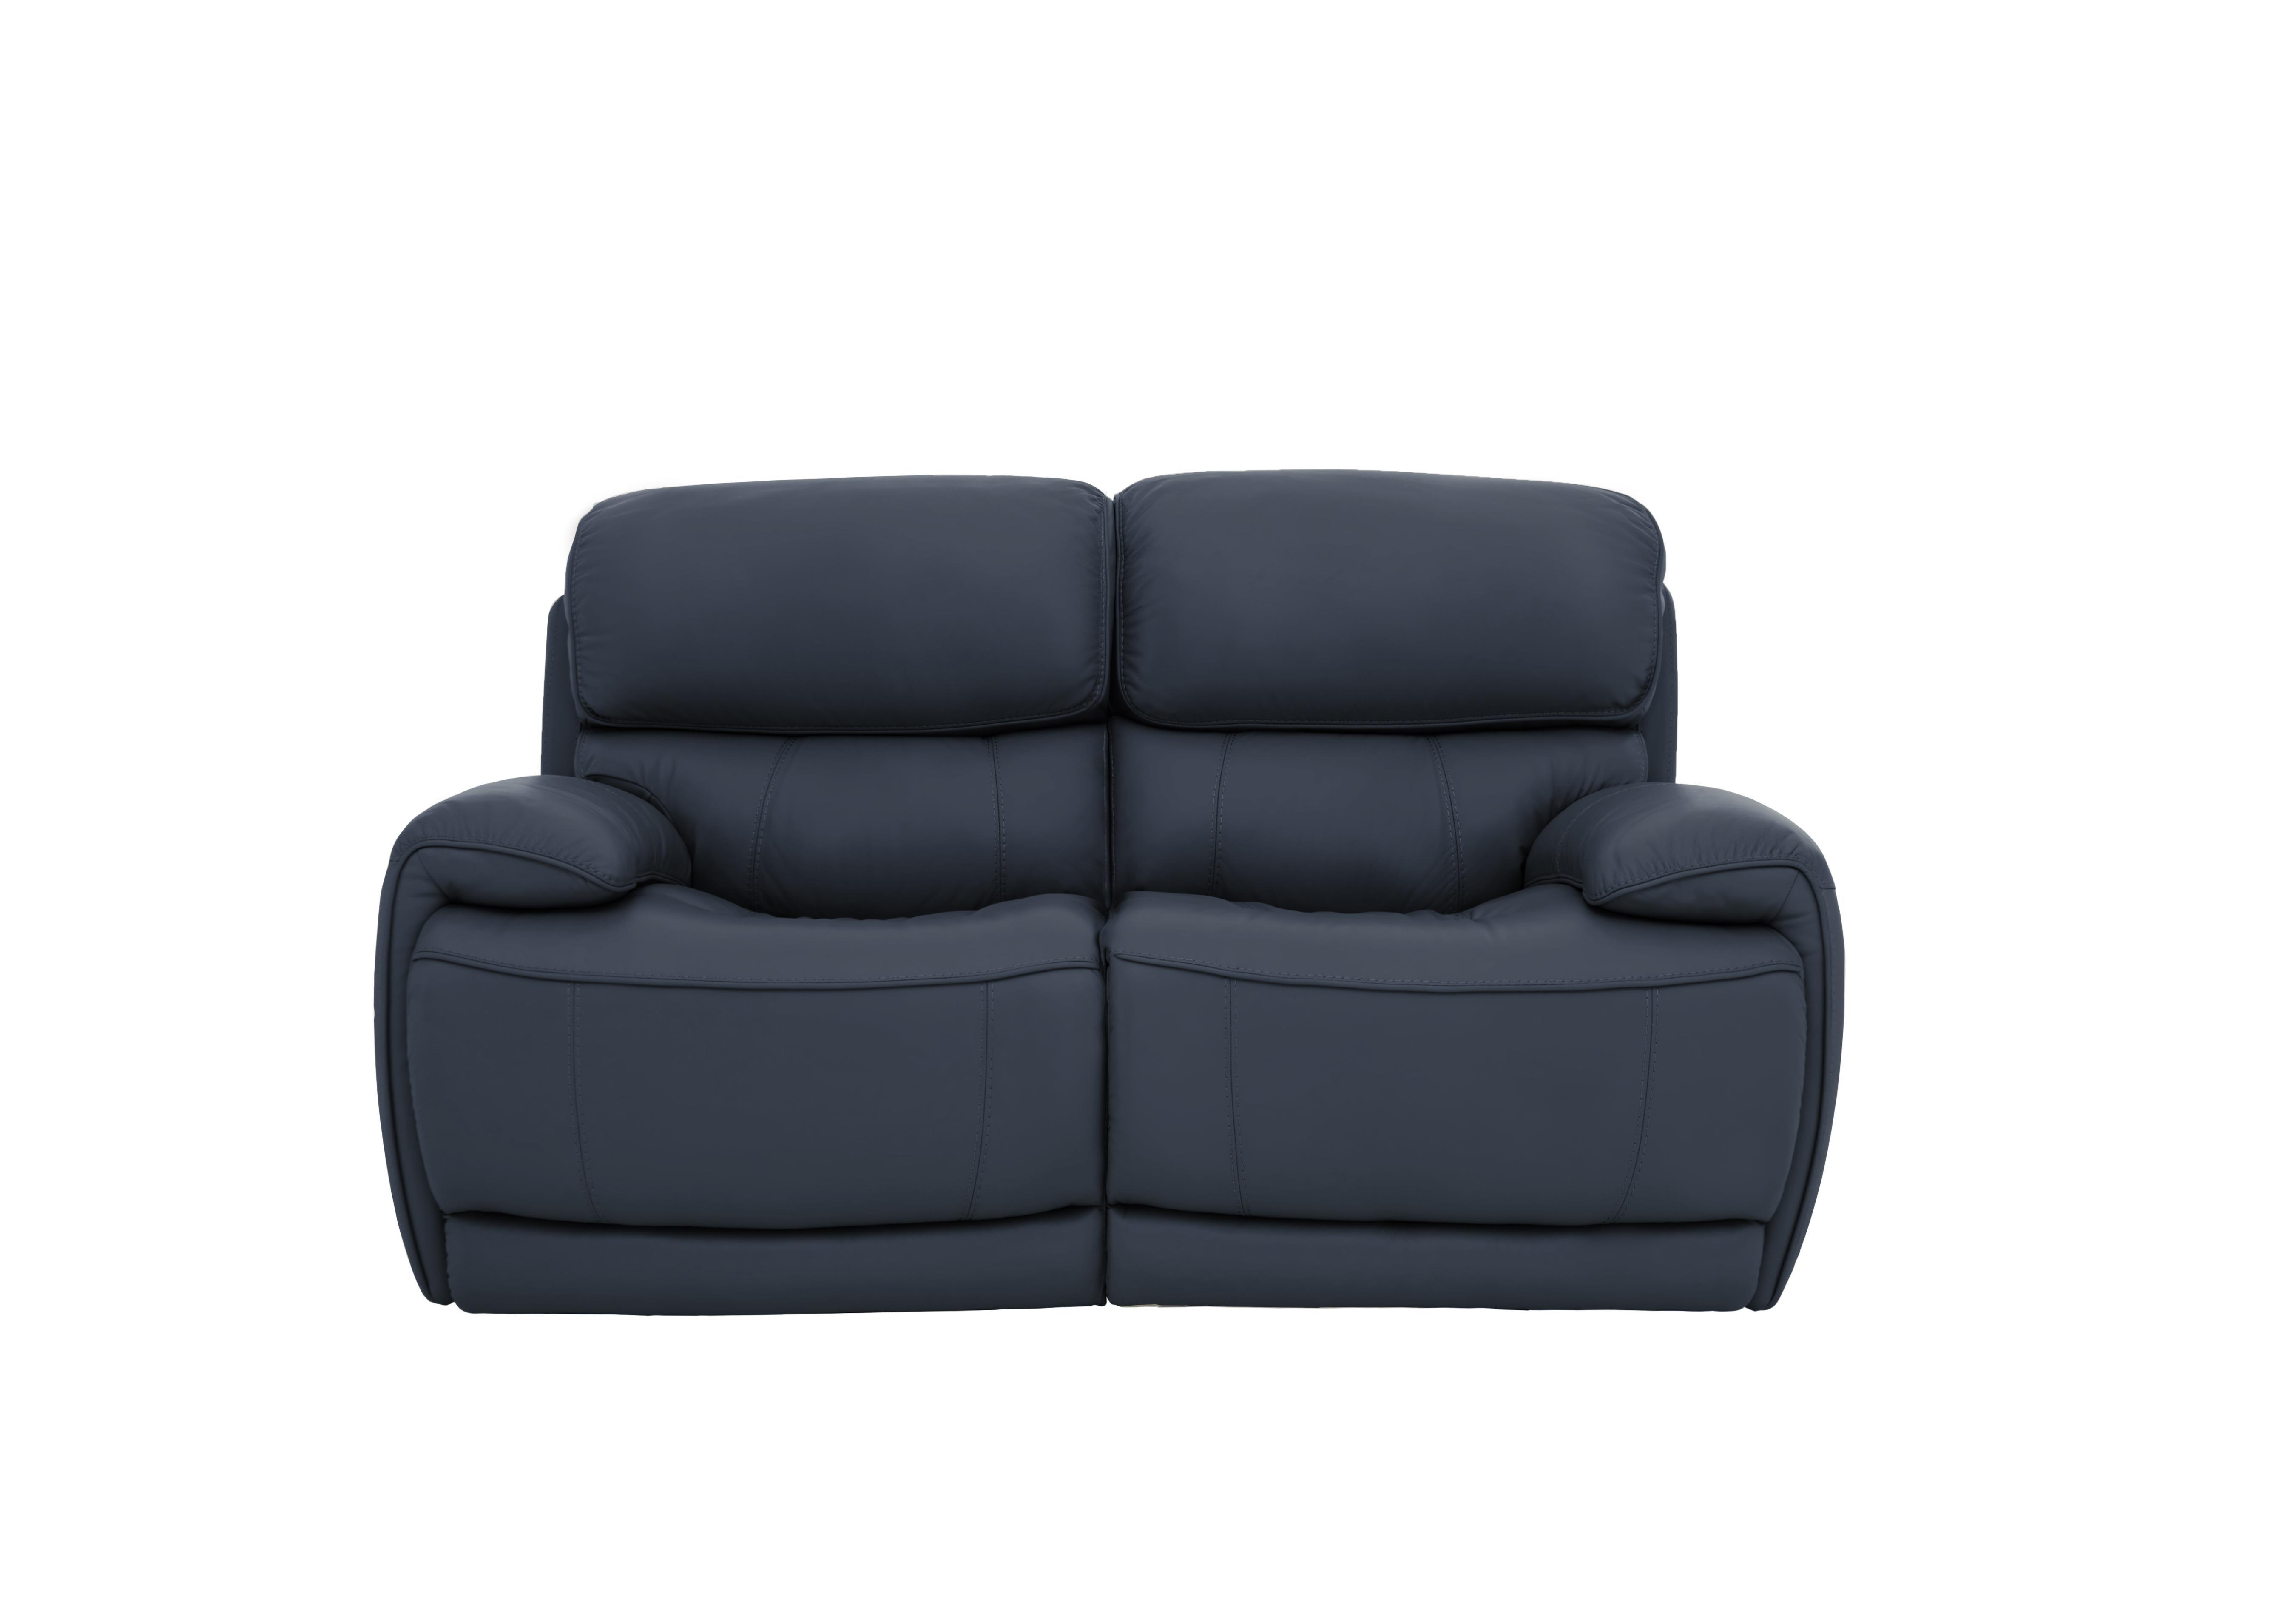 Rocco 2 Seater Leather Power Rocker Sofa with Power Headrests in Bv-313e Ocean Blue on Furniture Village